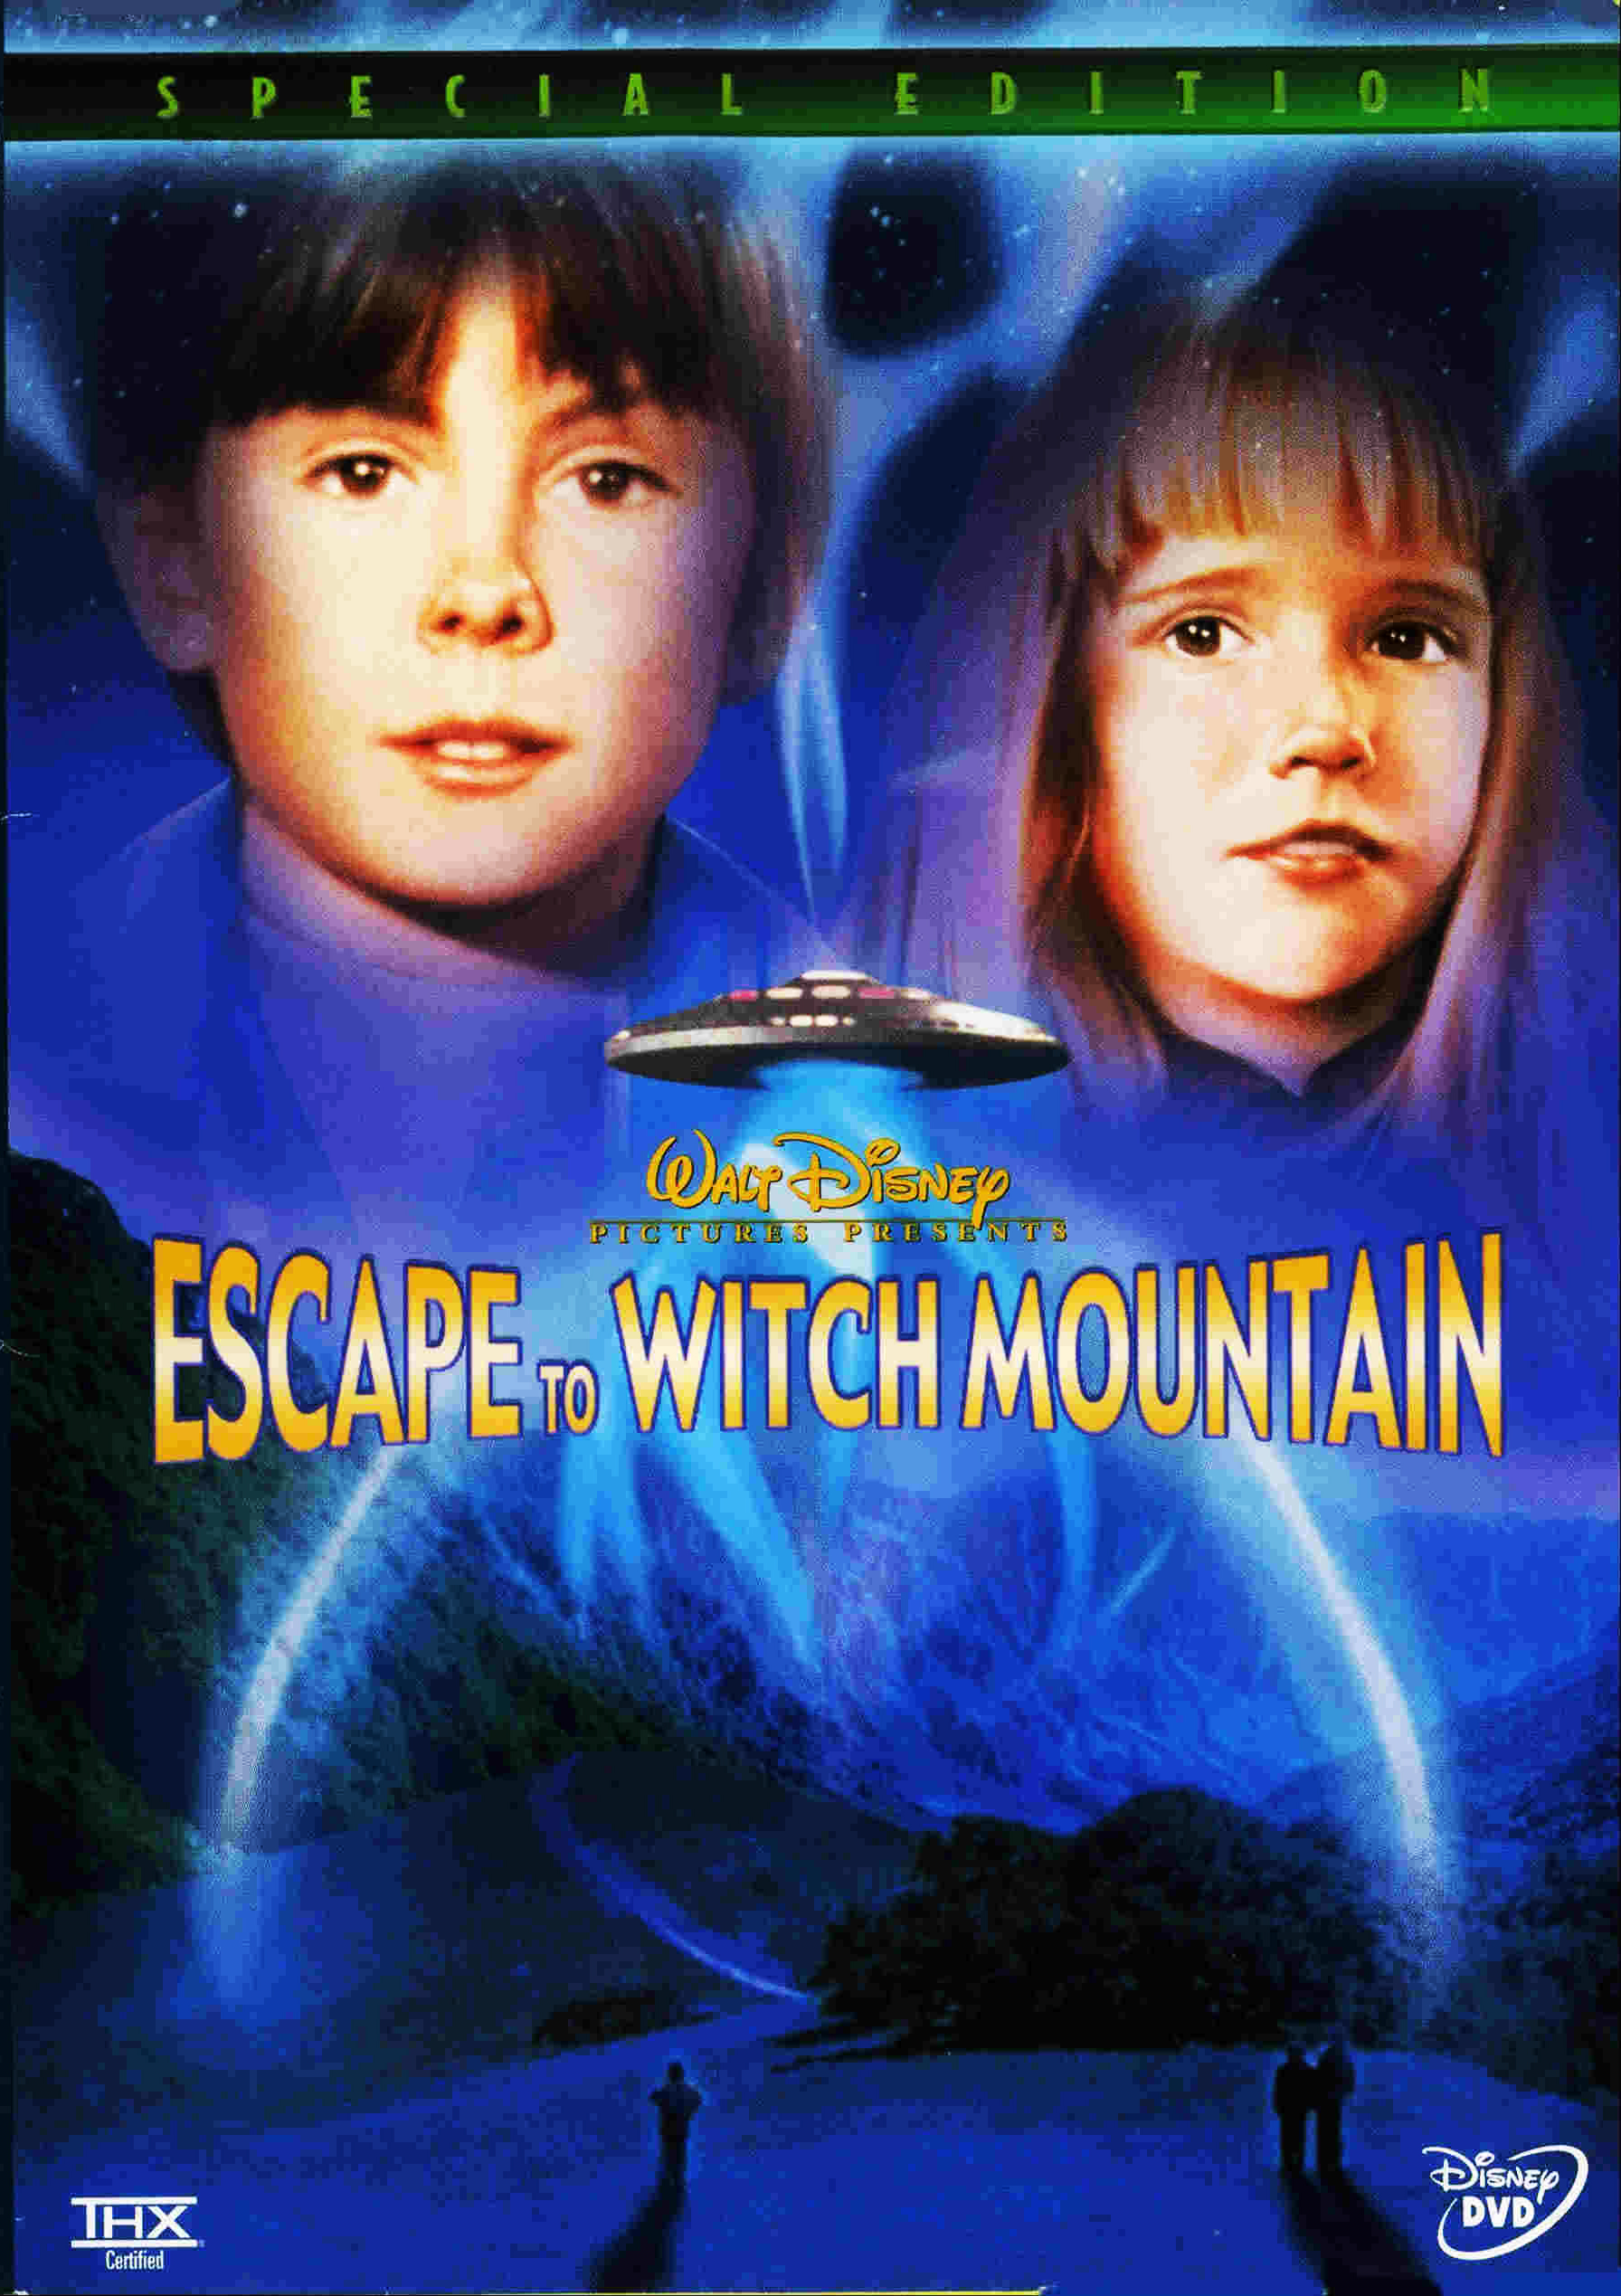     - Escape to Witch Mountain